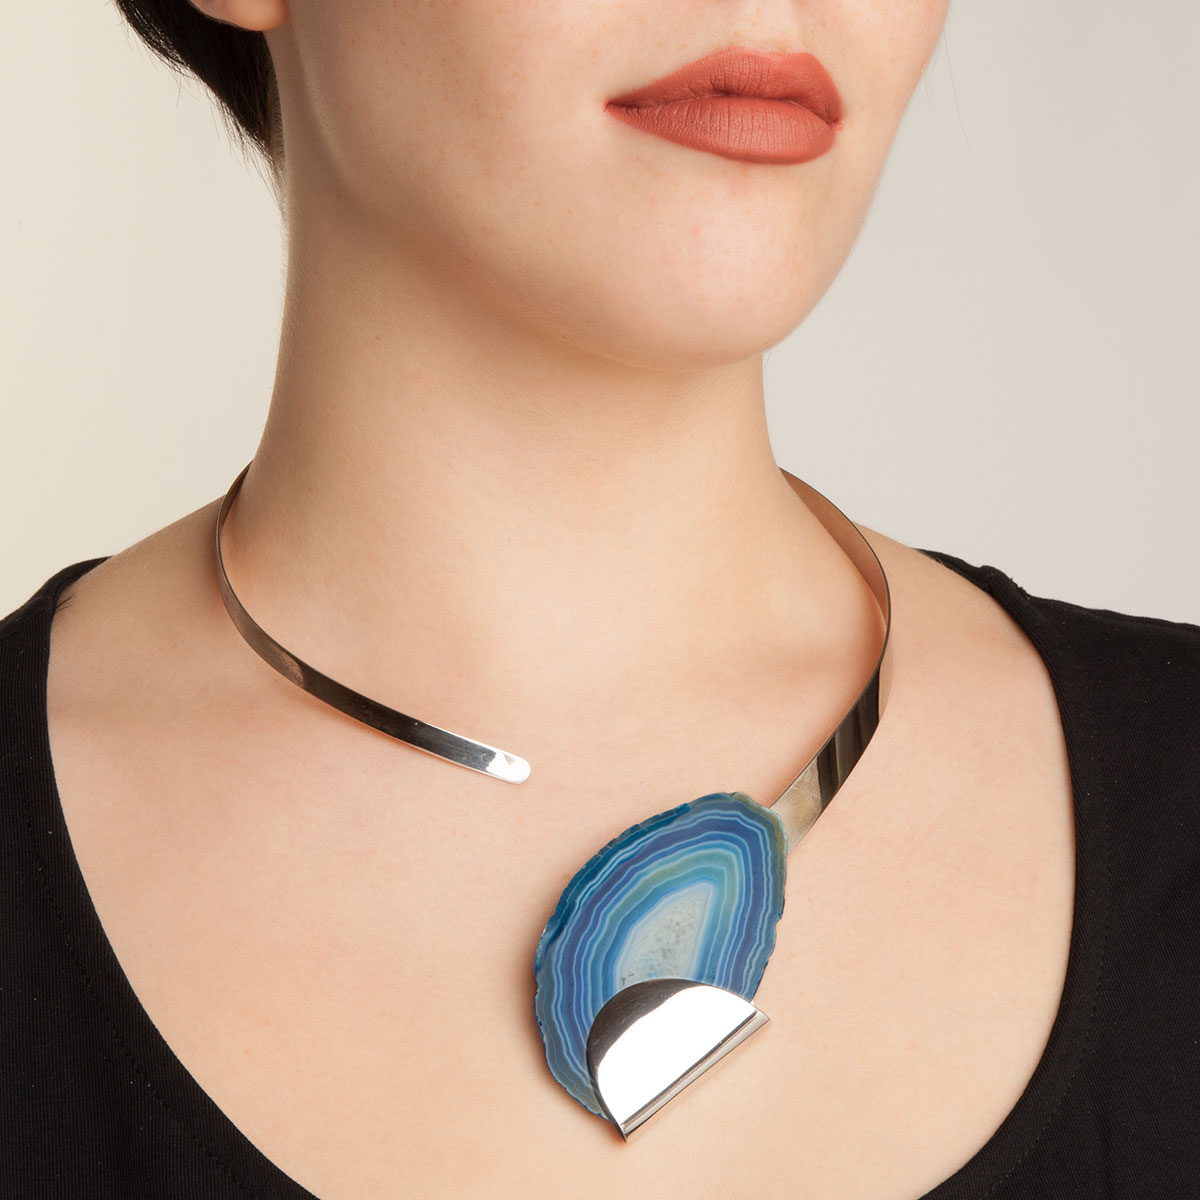 handmade Cir necklace in sterling silver and blue agate designed by Belen Bajo m1